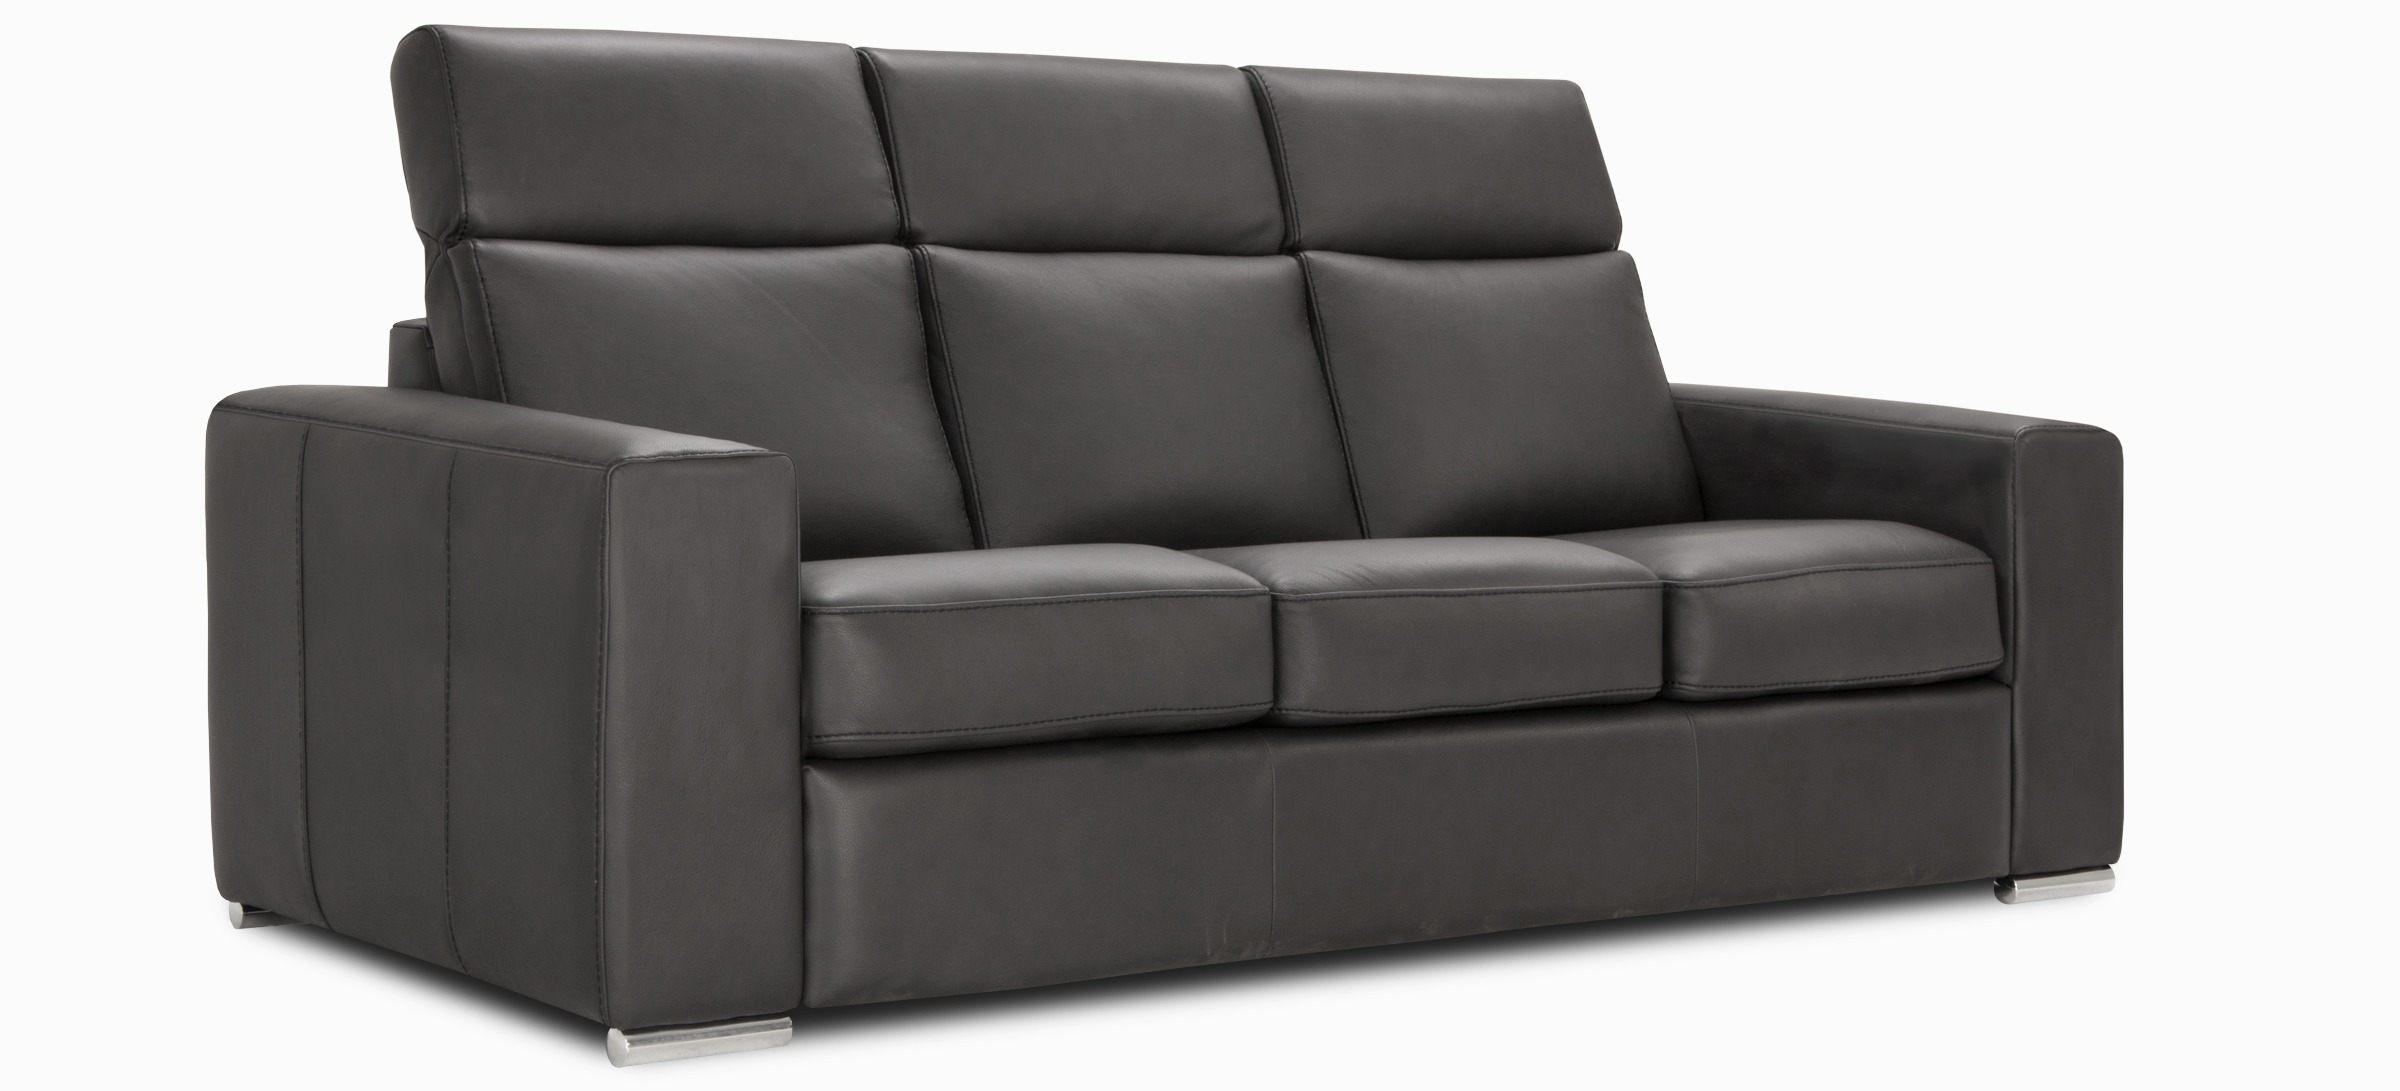 Seattle sofa cassiopee charcoal side